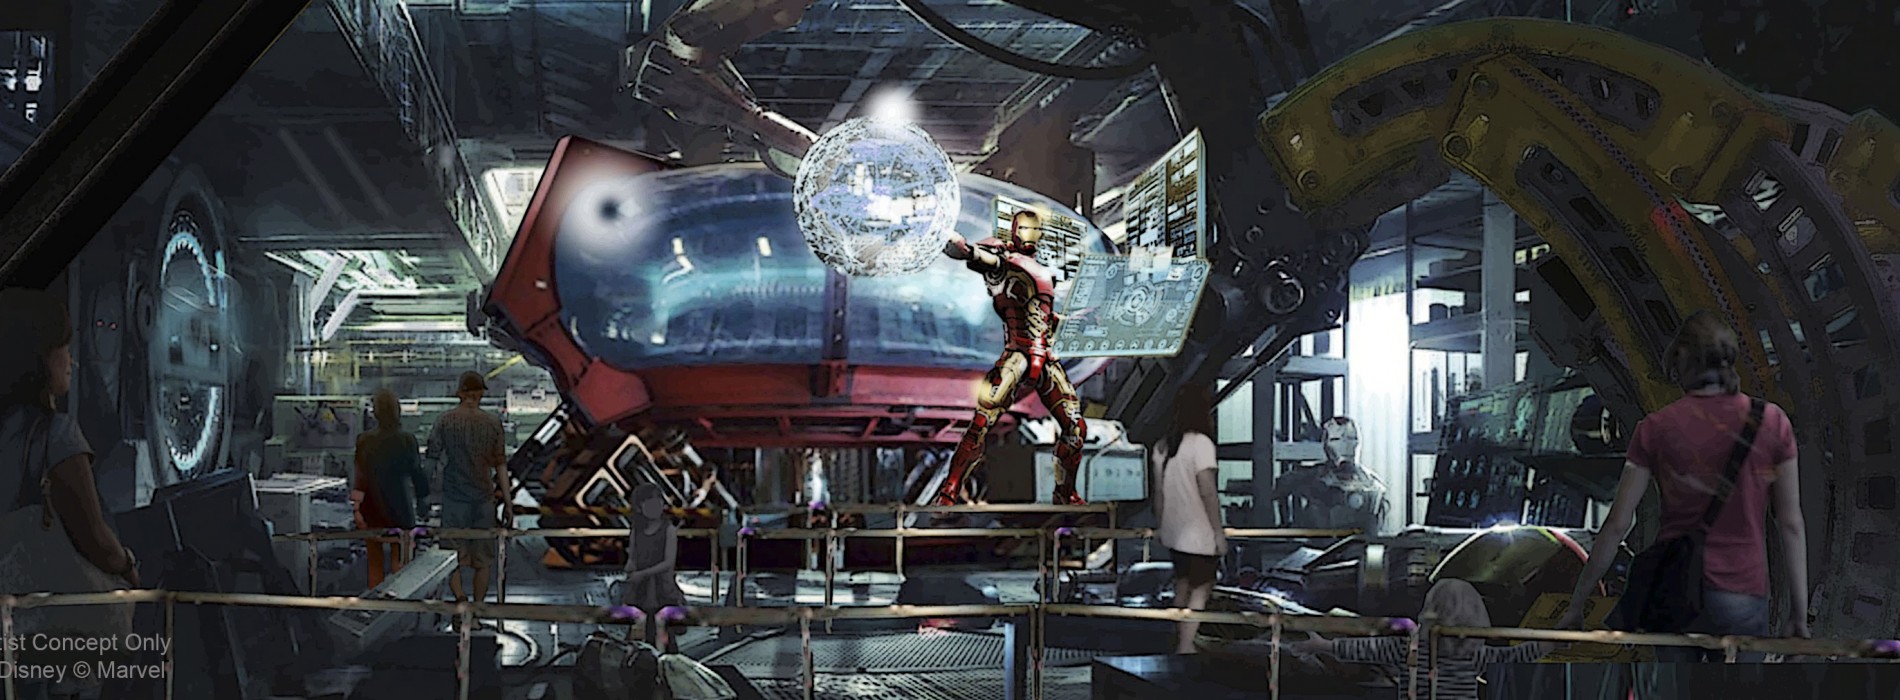 Disneyland Paris unveils plans for new Marvel-themed attraction